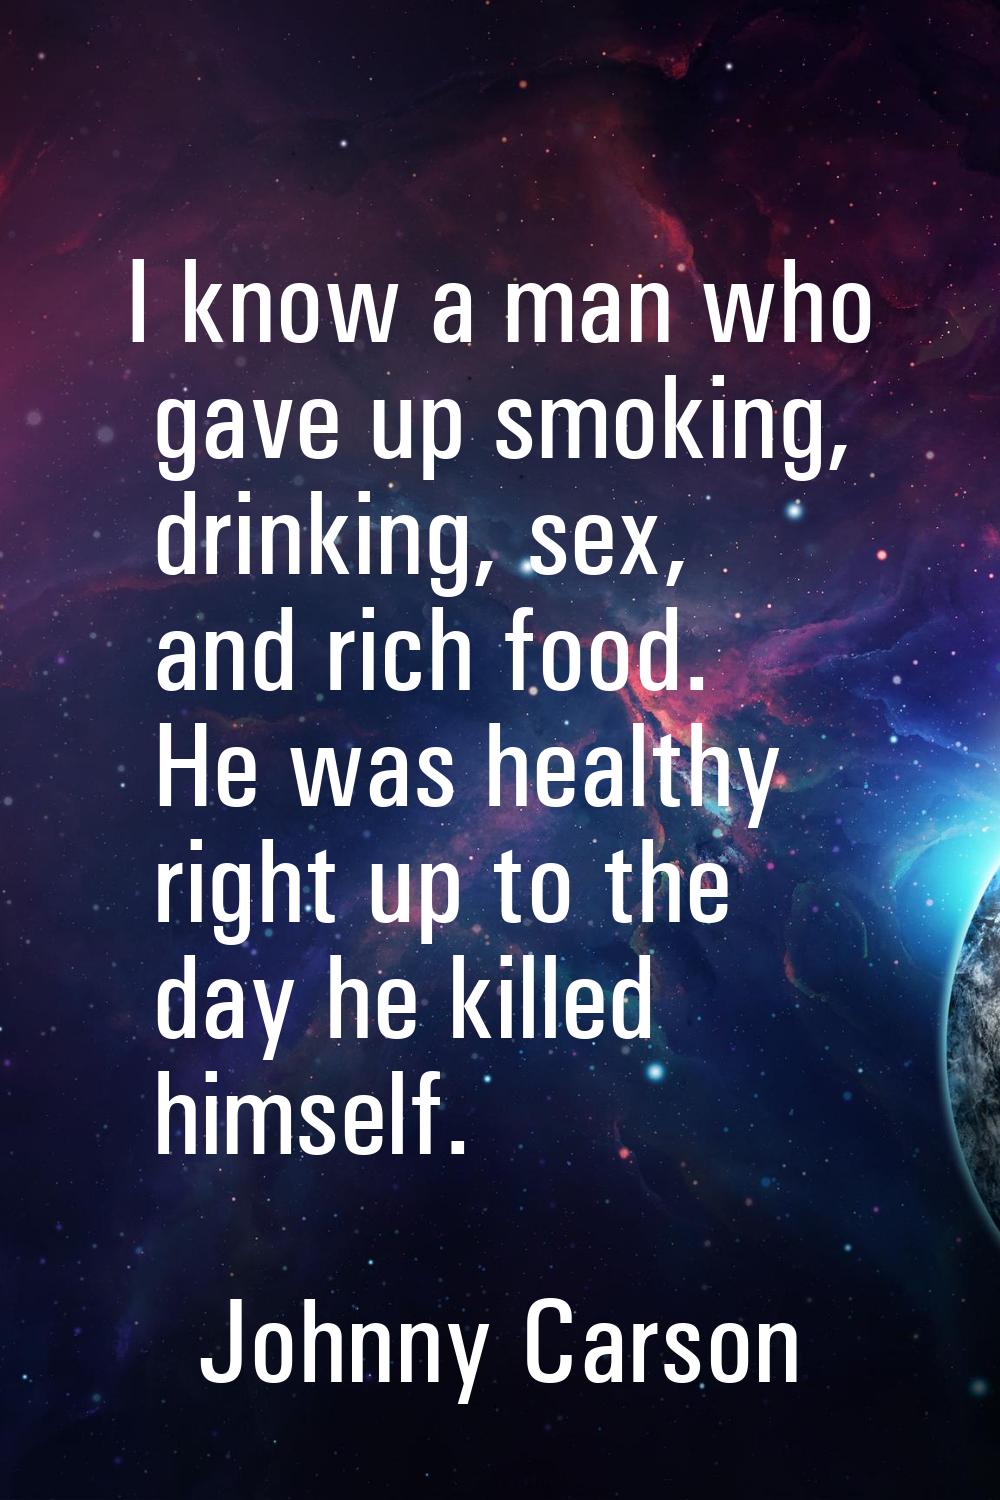 I know a man who gave up smoking, drinking, sex, and rich food. He was healthy right up to the day 